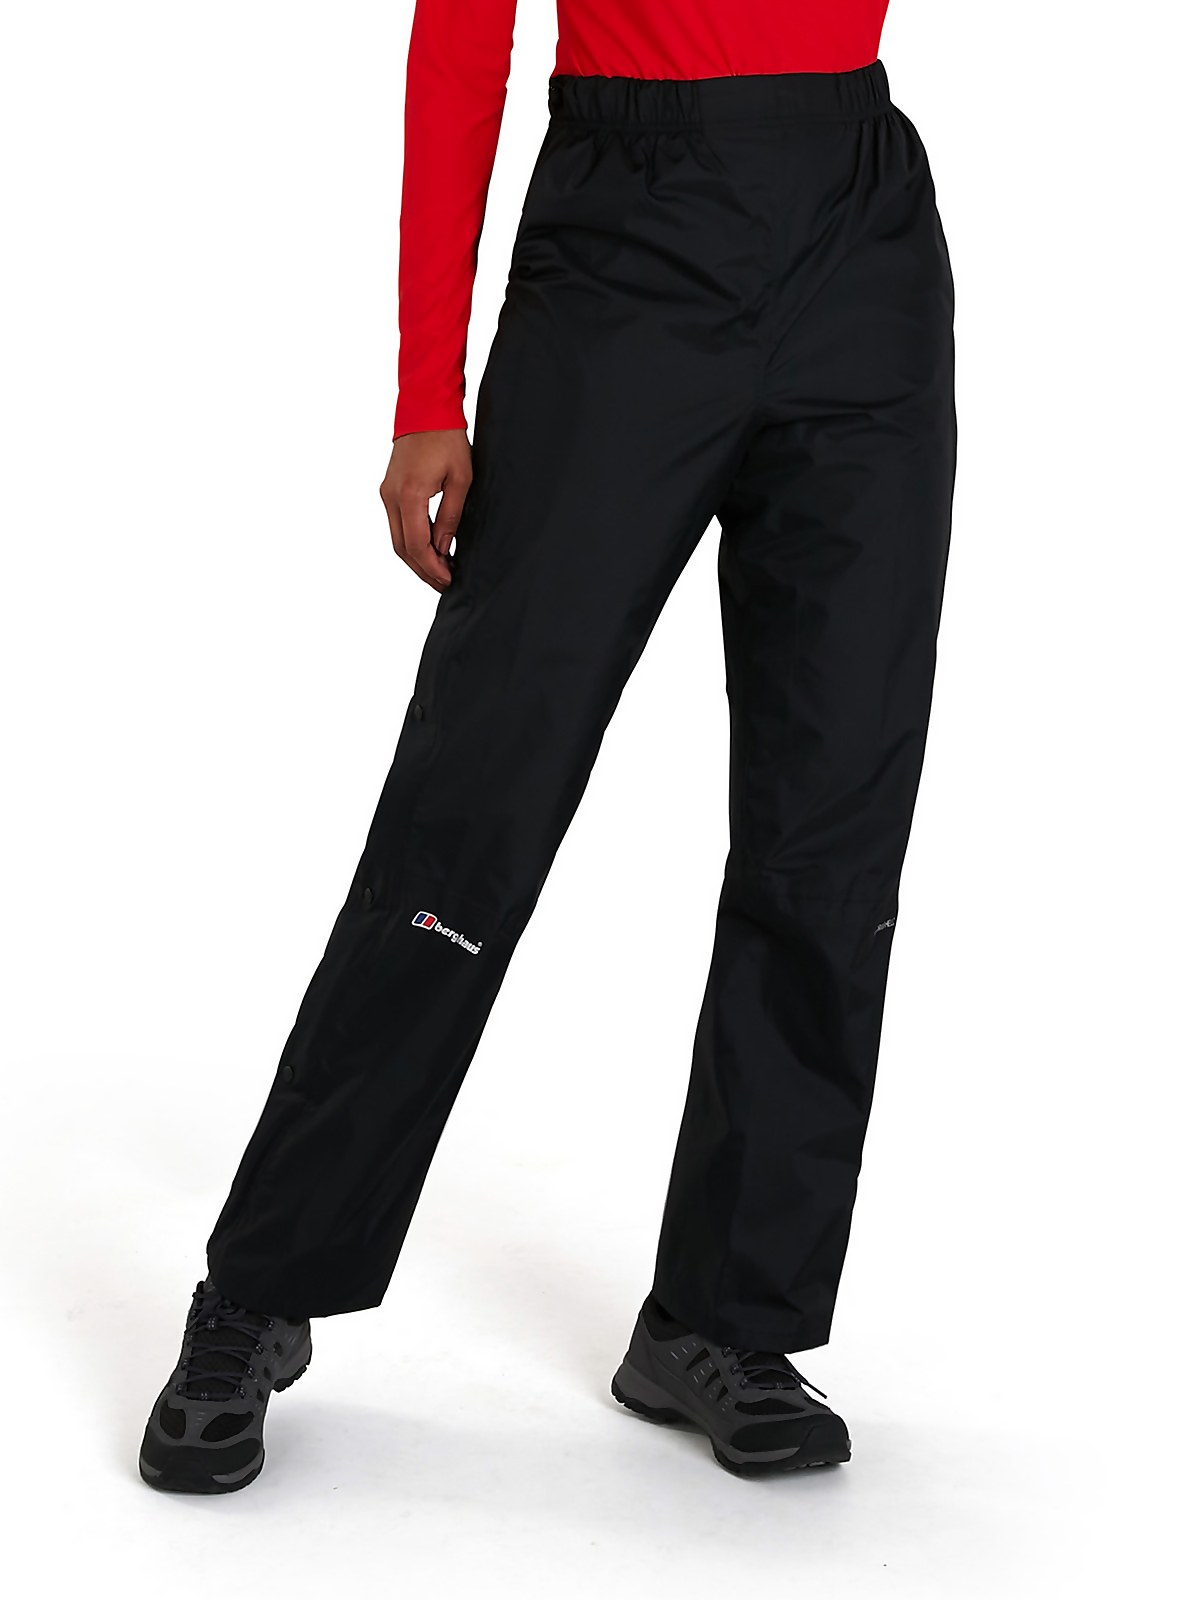 Women’s Deluge Overtrousers - Black